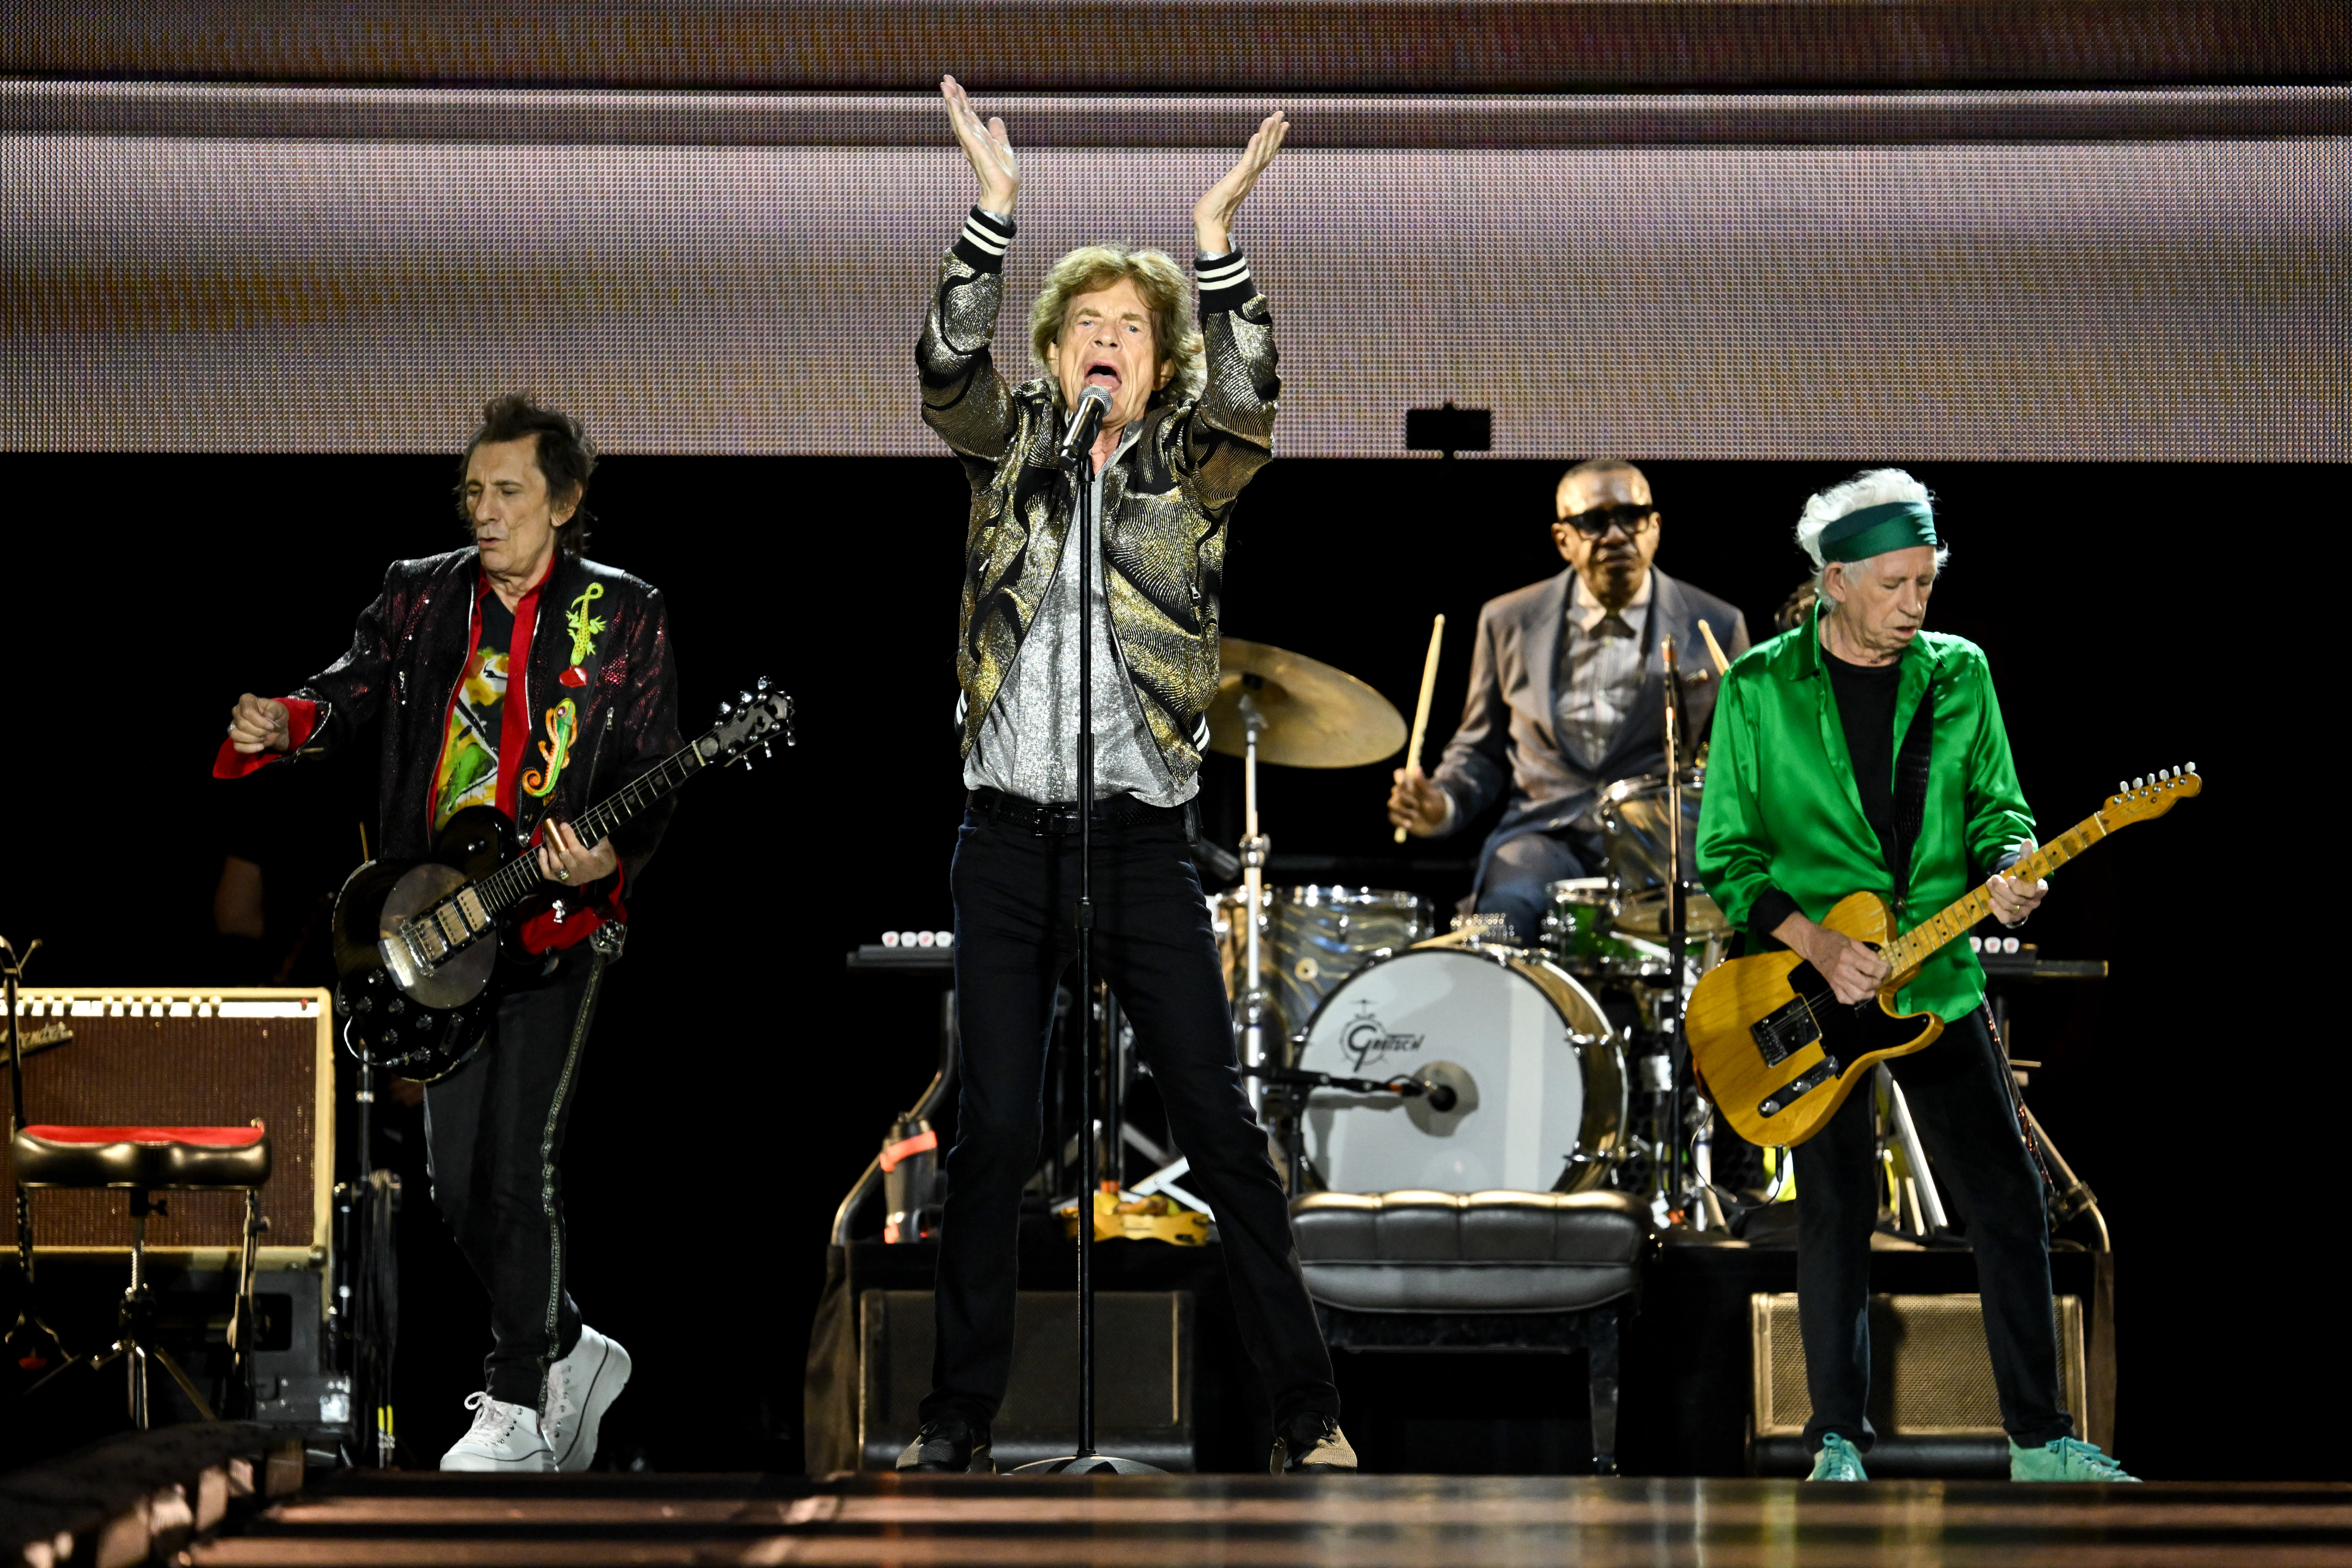 Rolling Stones Bring Back Octogenarian Pride, Rocking as Vigorously as Ever at SoFi Stadium Show: Concert Review